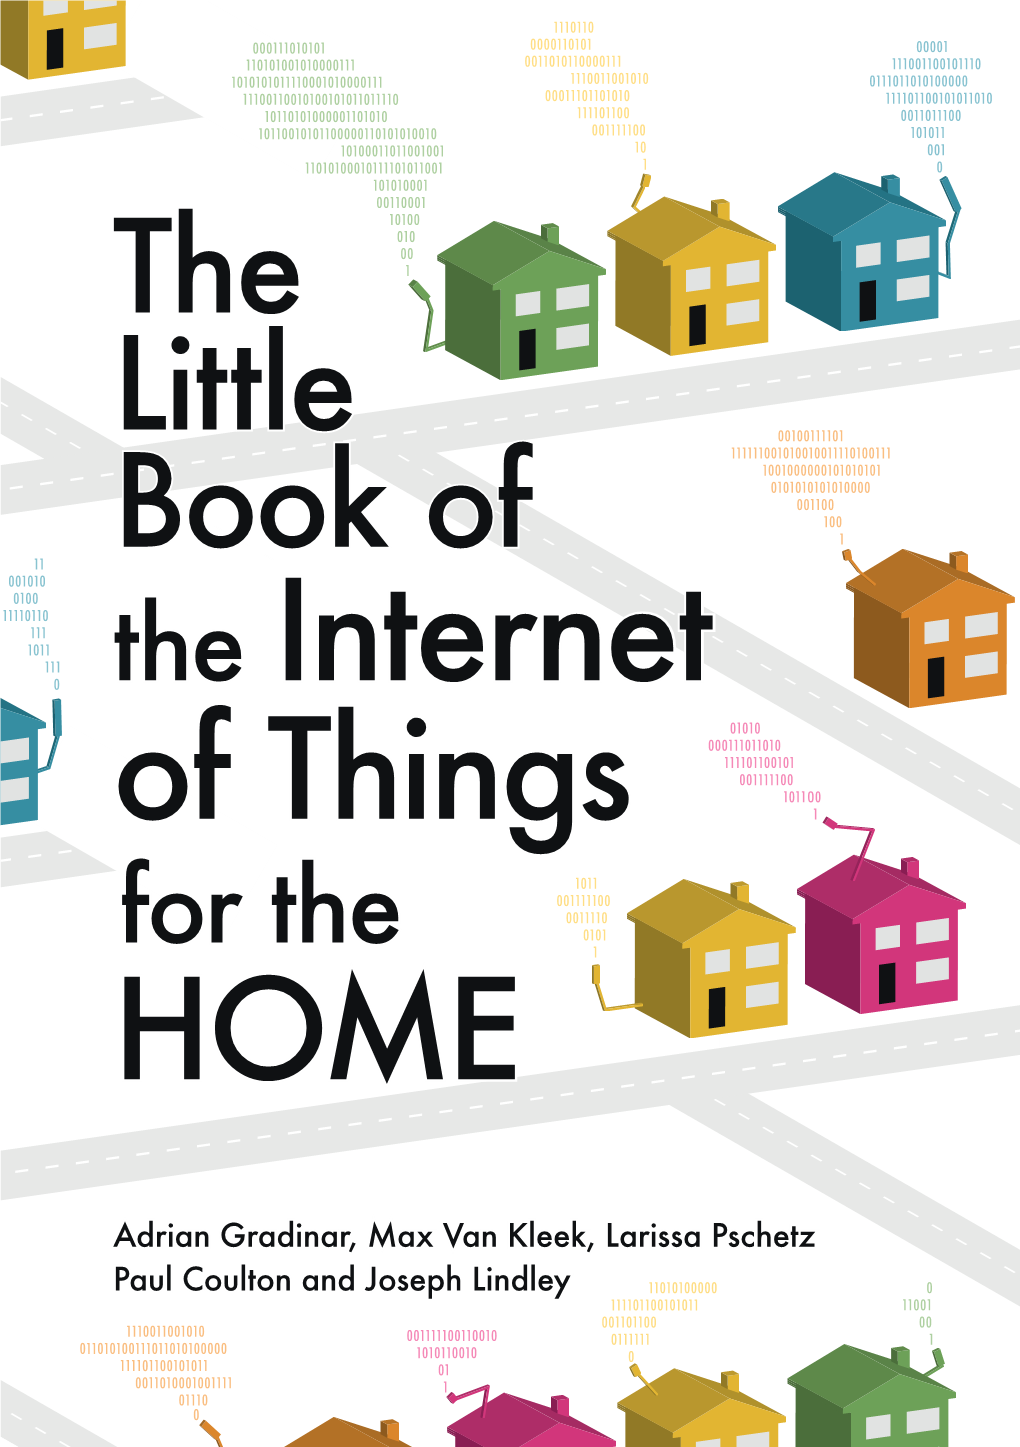 HOME of Things the Internet the Internet